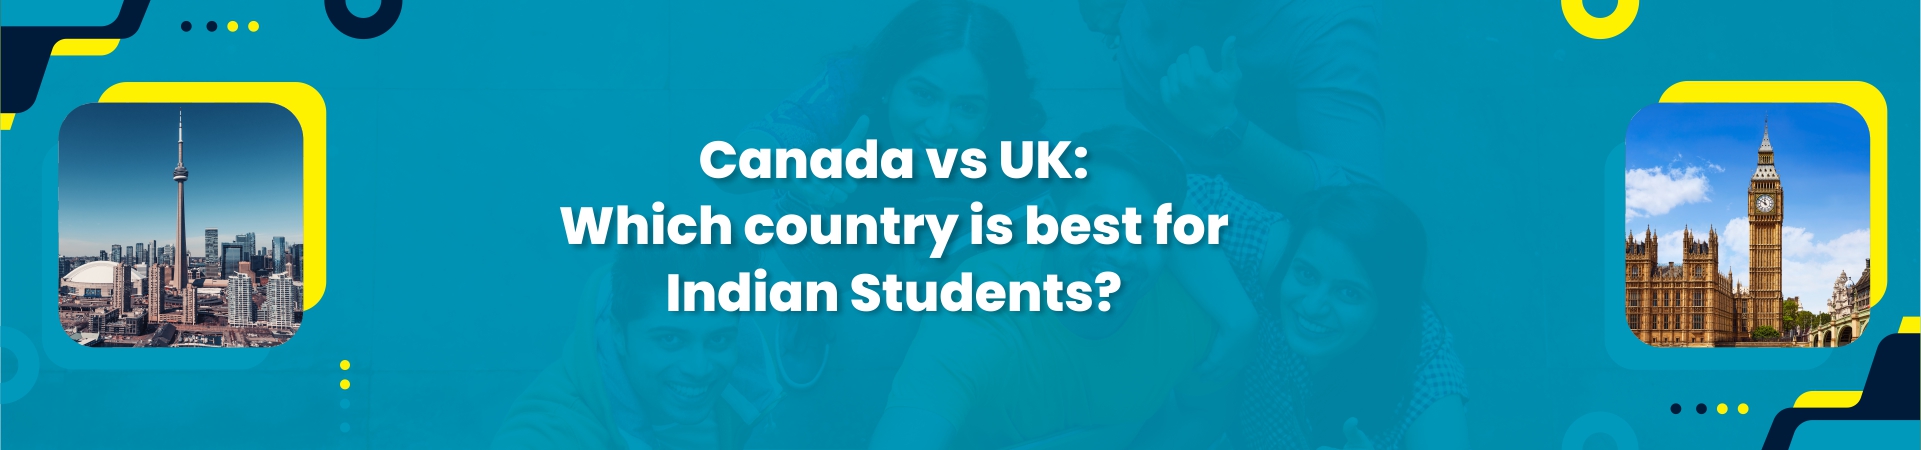 Canada vs UK: Best Choice for Indian Students?